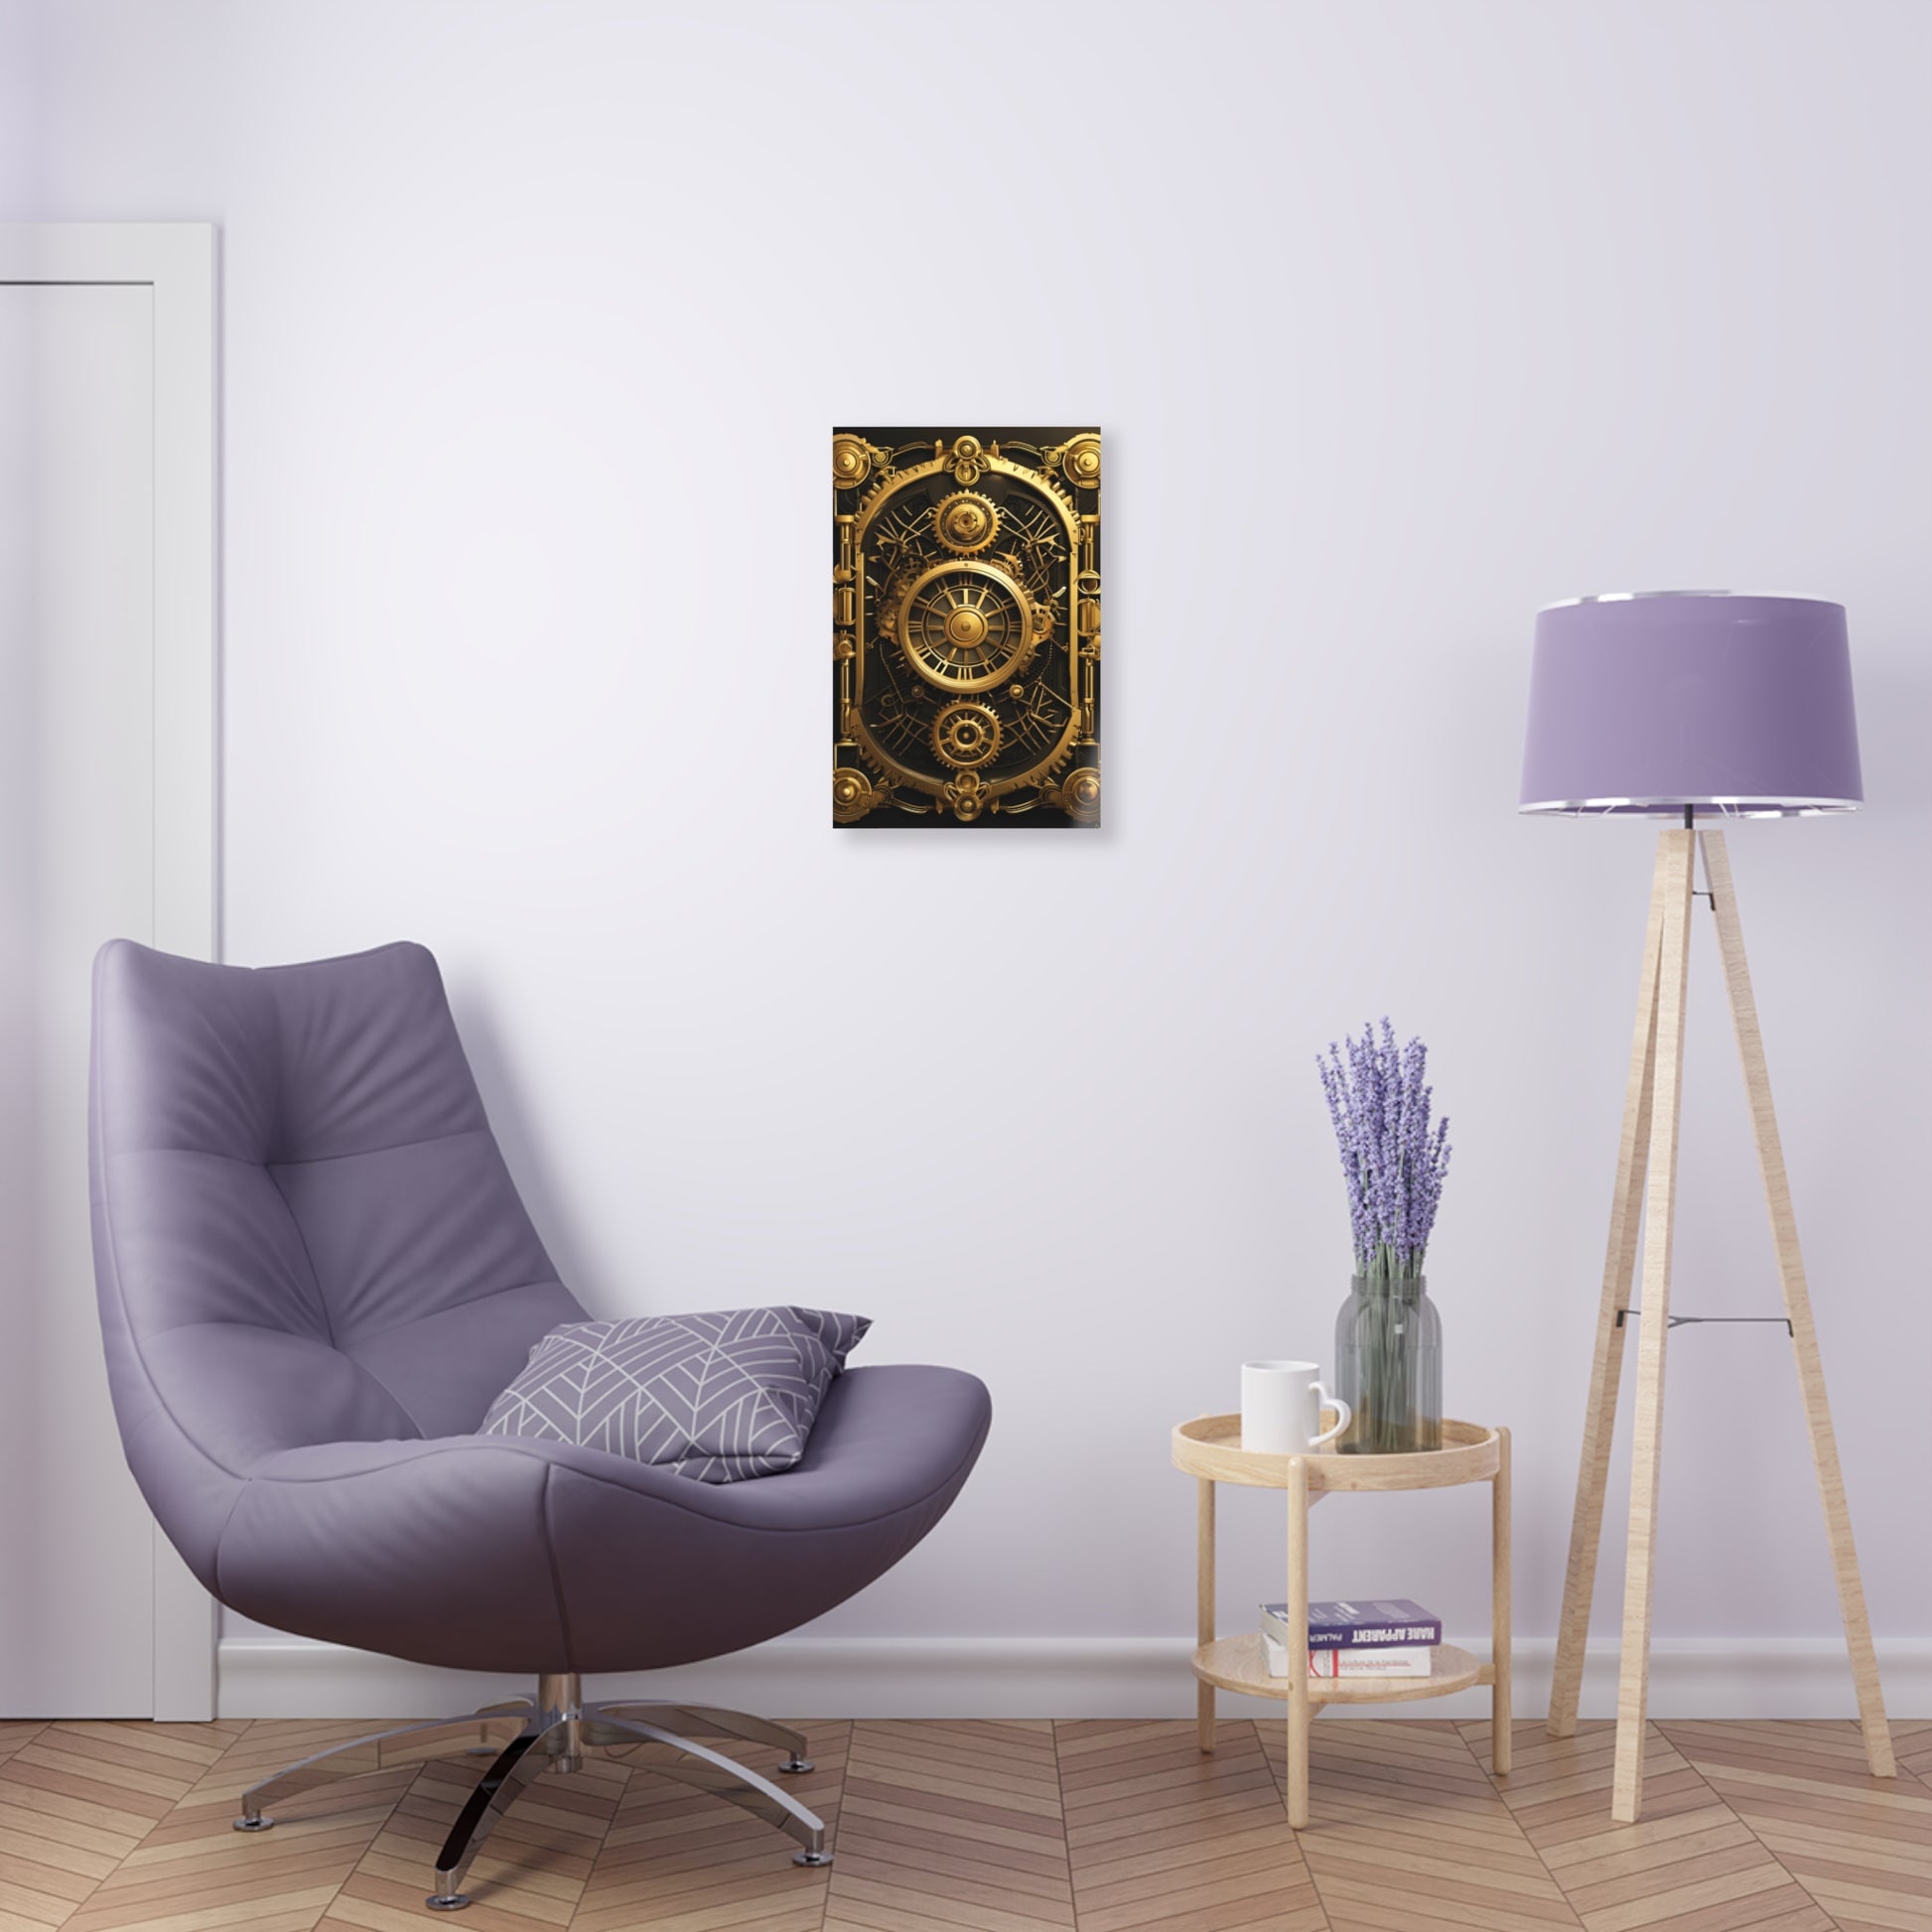 Art Deco themed steampunk gold and copper gears panel style printed on an acrylic panel 12x18 hung